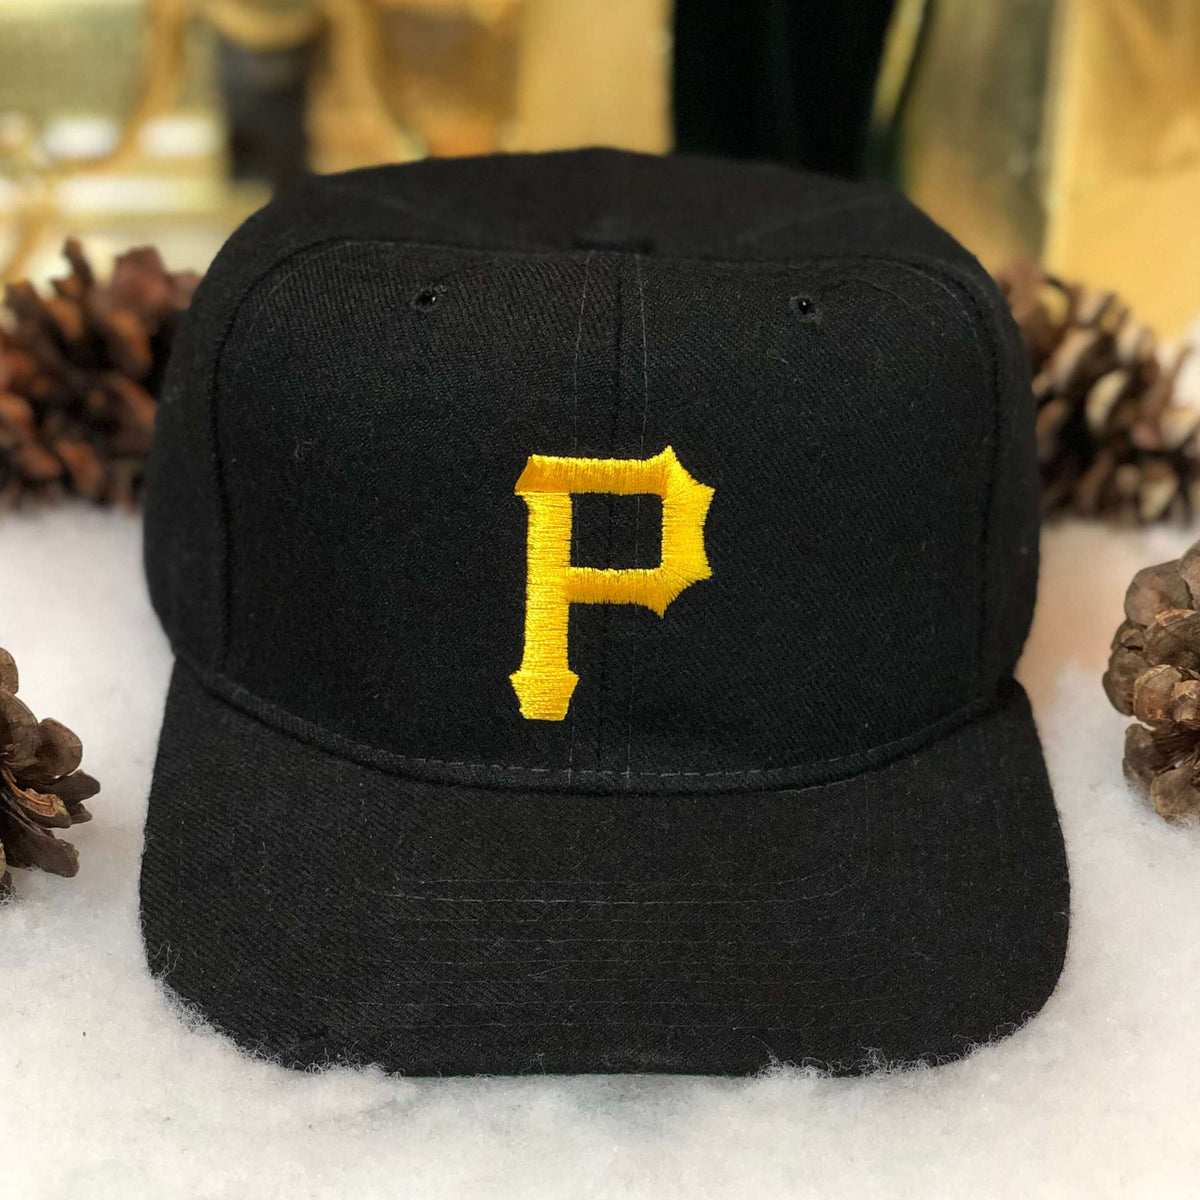 old pittsburgh pirates hat